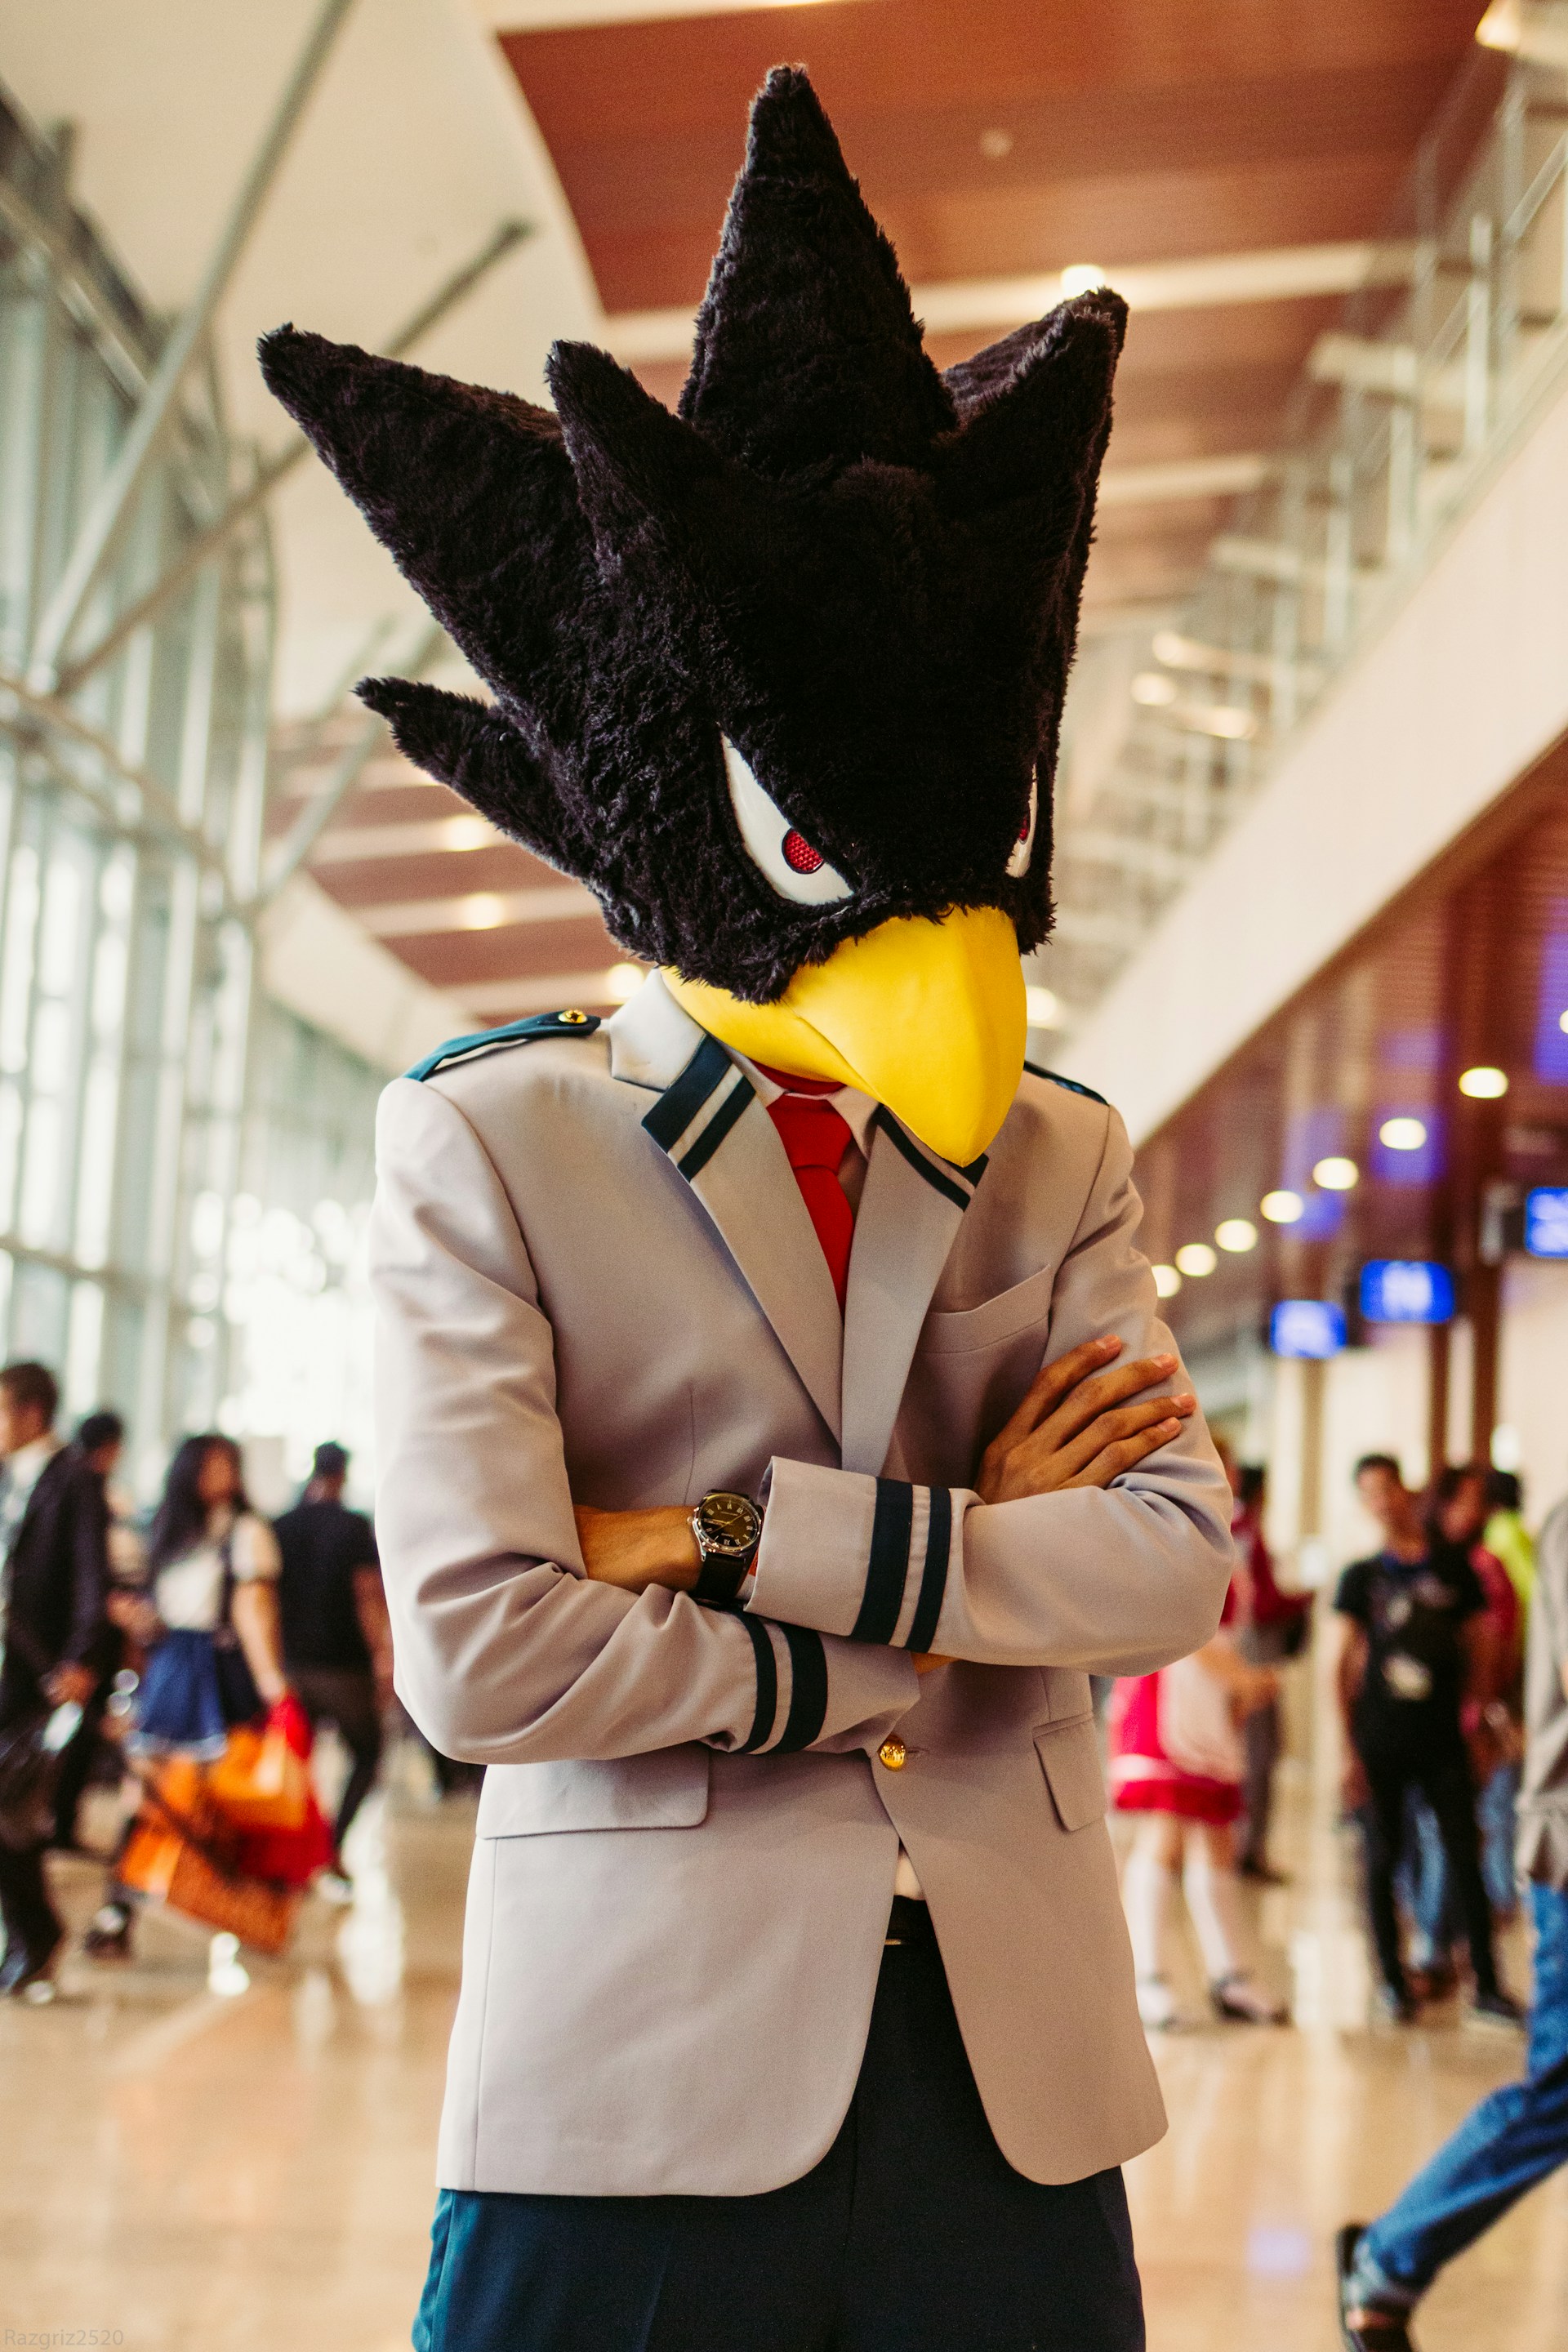 Photo of a person dressed in a pilot's outfit, wearing a large mascot head shaped like a scowling bird with black spikey feathers.